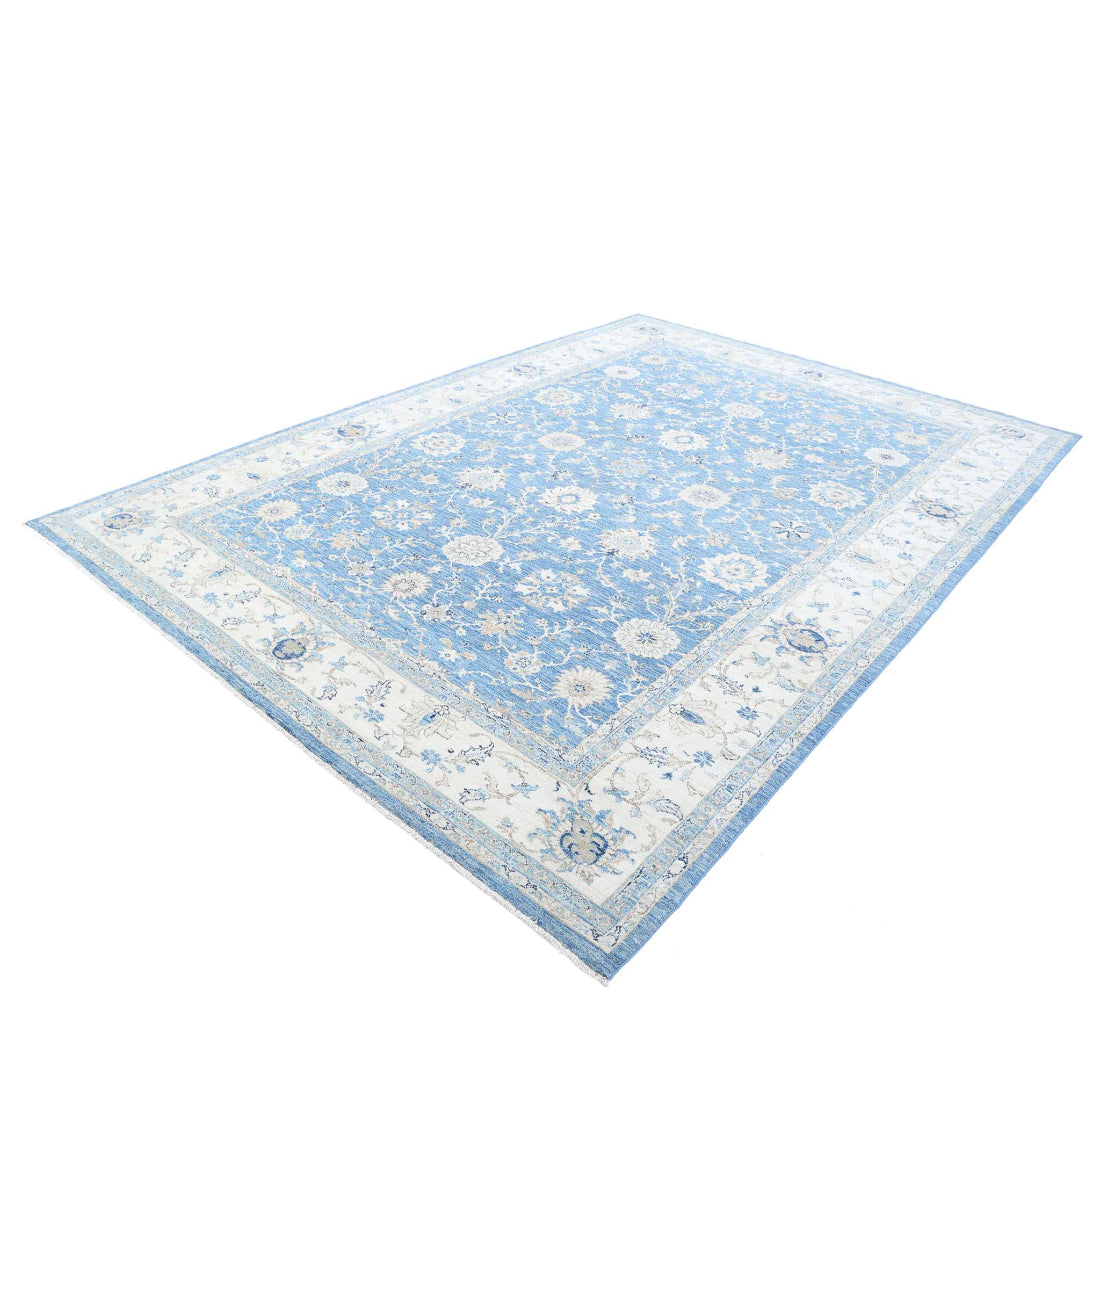 Serenity 8'1'' X 11'5'' Hand-Knotted Wool Rug 8'1'' x 11'5'' (243 X 343) / Blue / Ivory